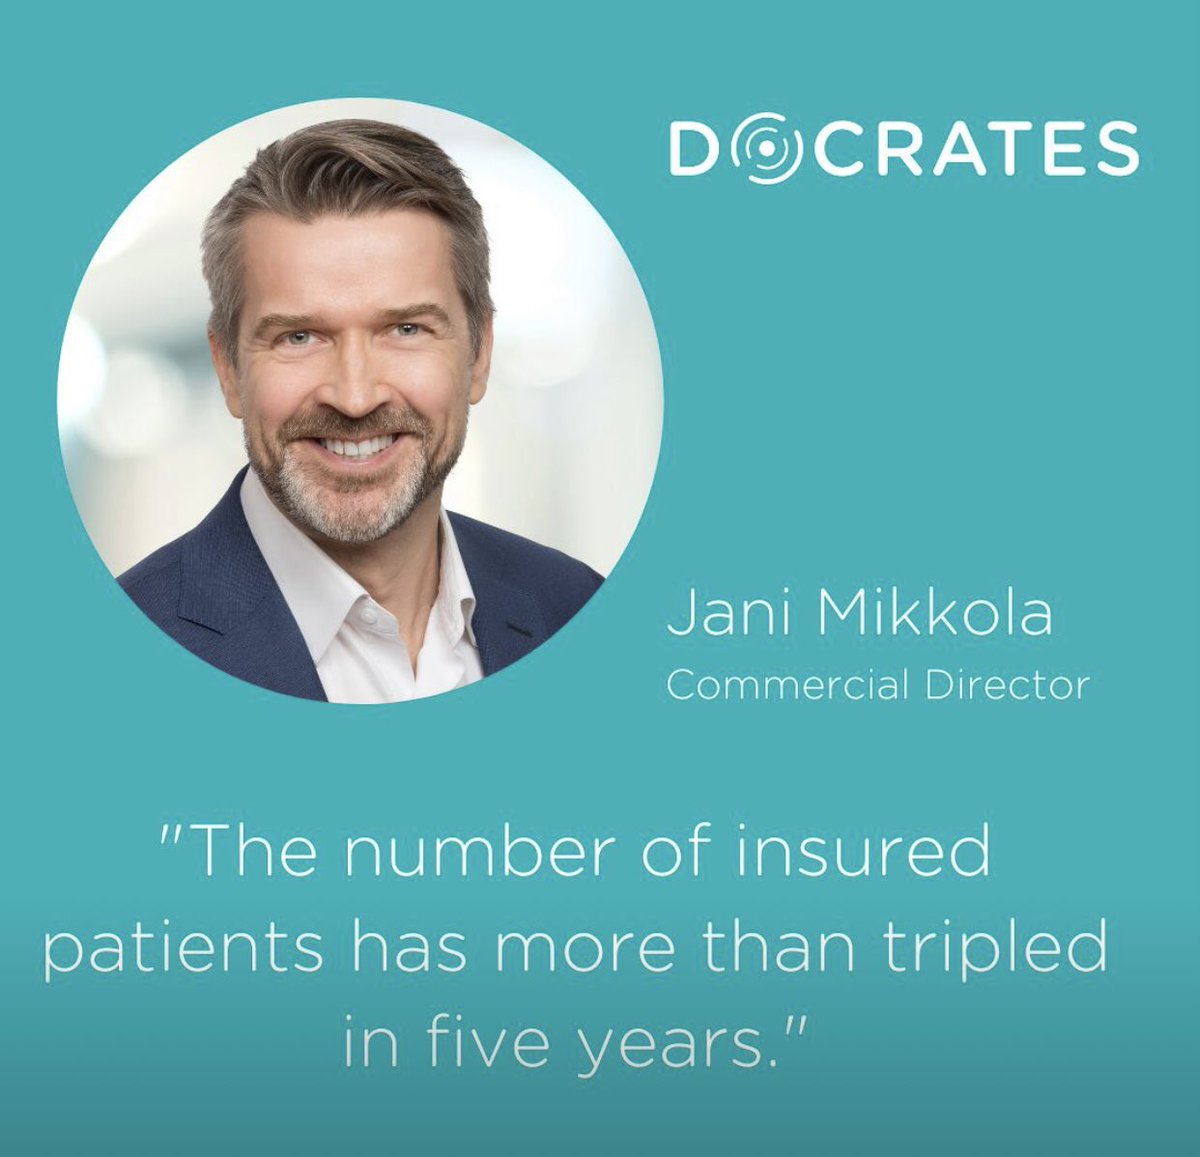 A new phenomen in the field of private Cancer treatment: the number of insured patients has more than tripled on five years. Read more here: docrates.com/en/the-number-… #cancertreatment #cancerdiagnostics